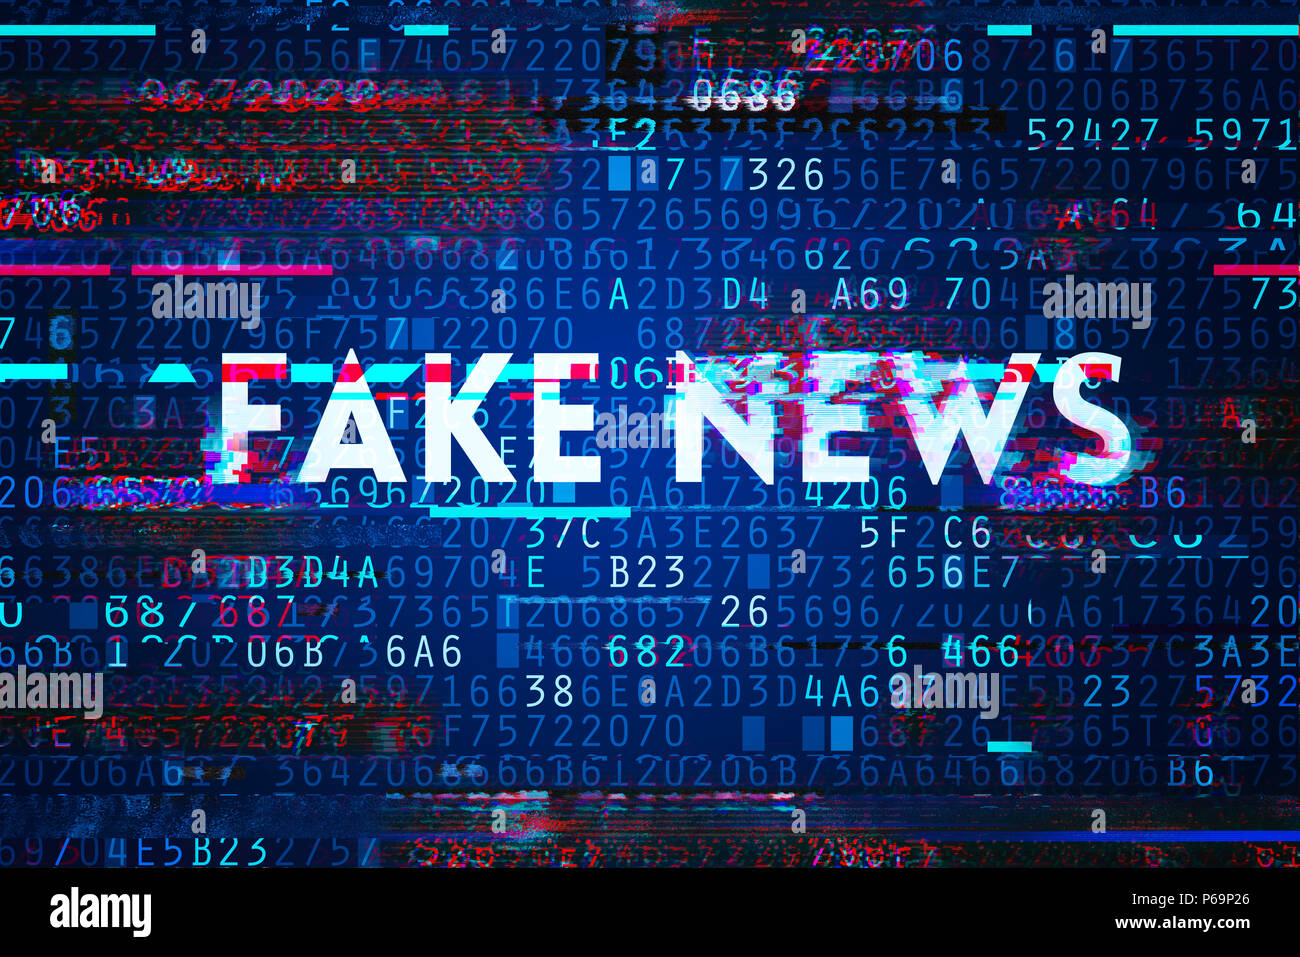 Fake news on internet in modern digital age, conceptual illustration with text overlaying hexadecimal encrypted computer code Stock Photo